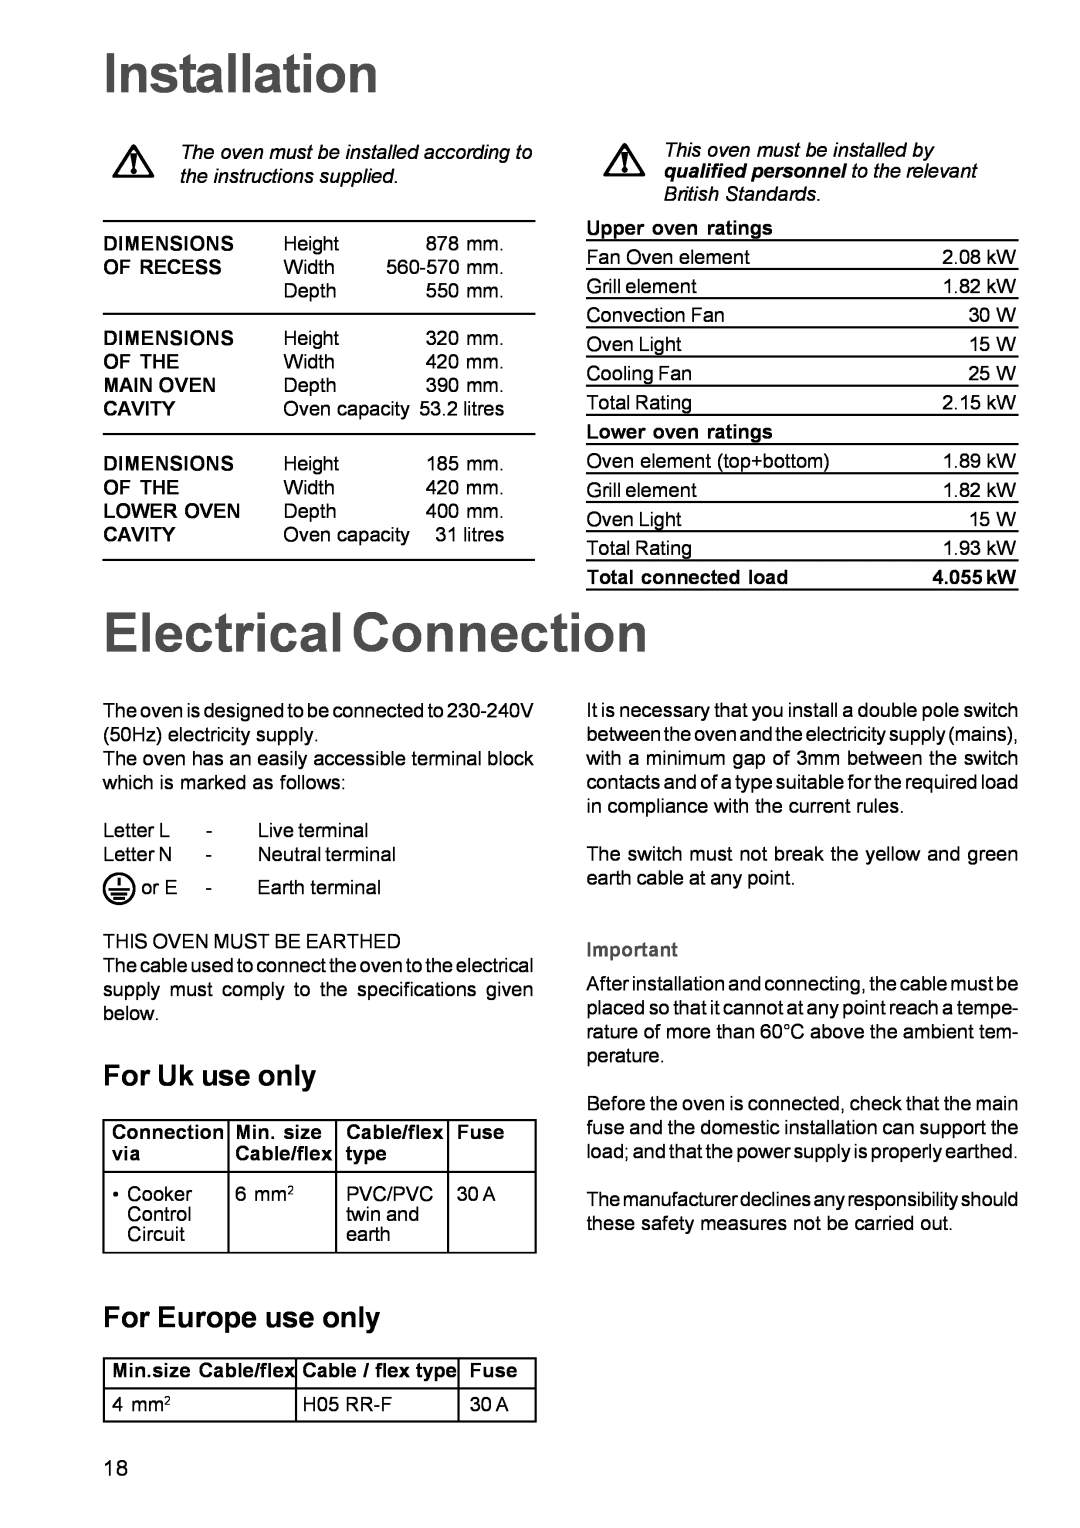 Zanussi ZDC 888 manual Installation, Electrical Connection, For Uk use only, For Europe use only 